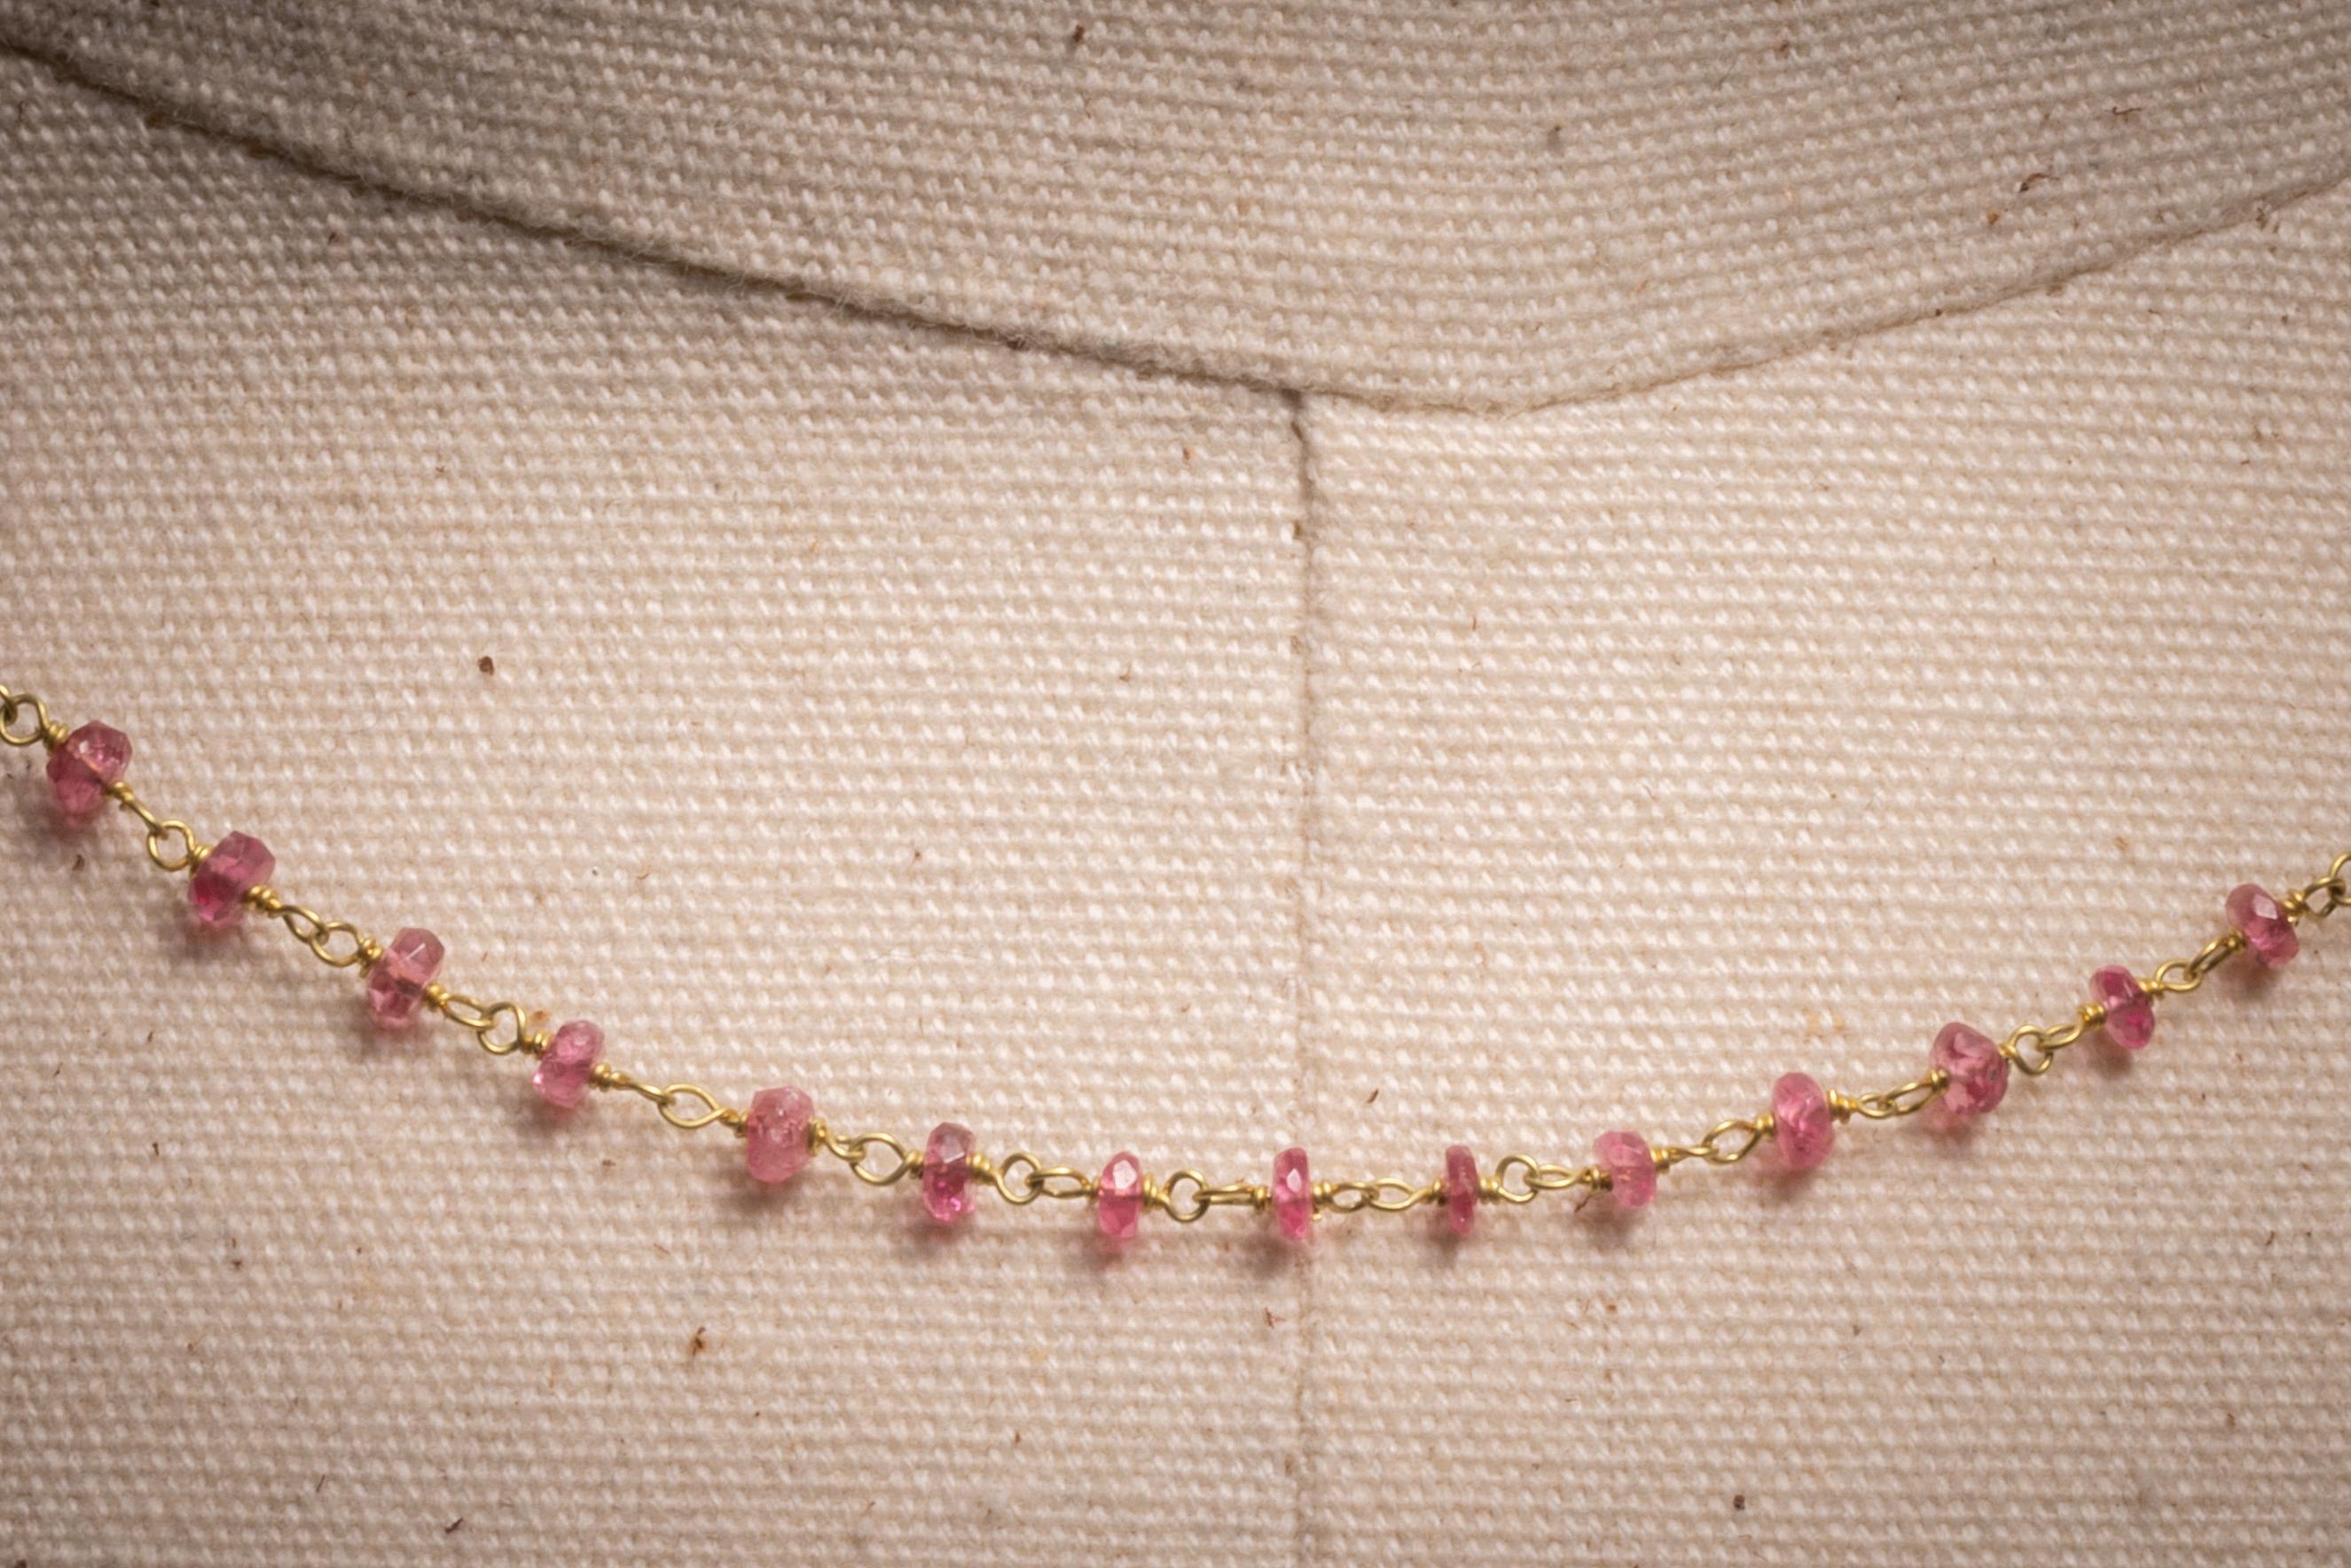 A simple and lovely 18K gold hand-wired link necklace with faceted Burmese ruby beads.  Rubies from this area tend to be more pink than that your traditional red ruby. S-hook clasp in 18K.

The fine jewelry collection is sourced, designed or created